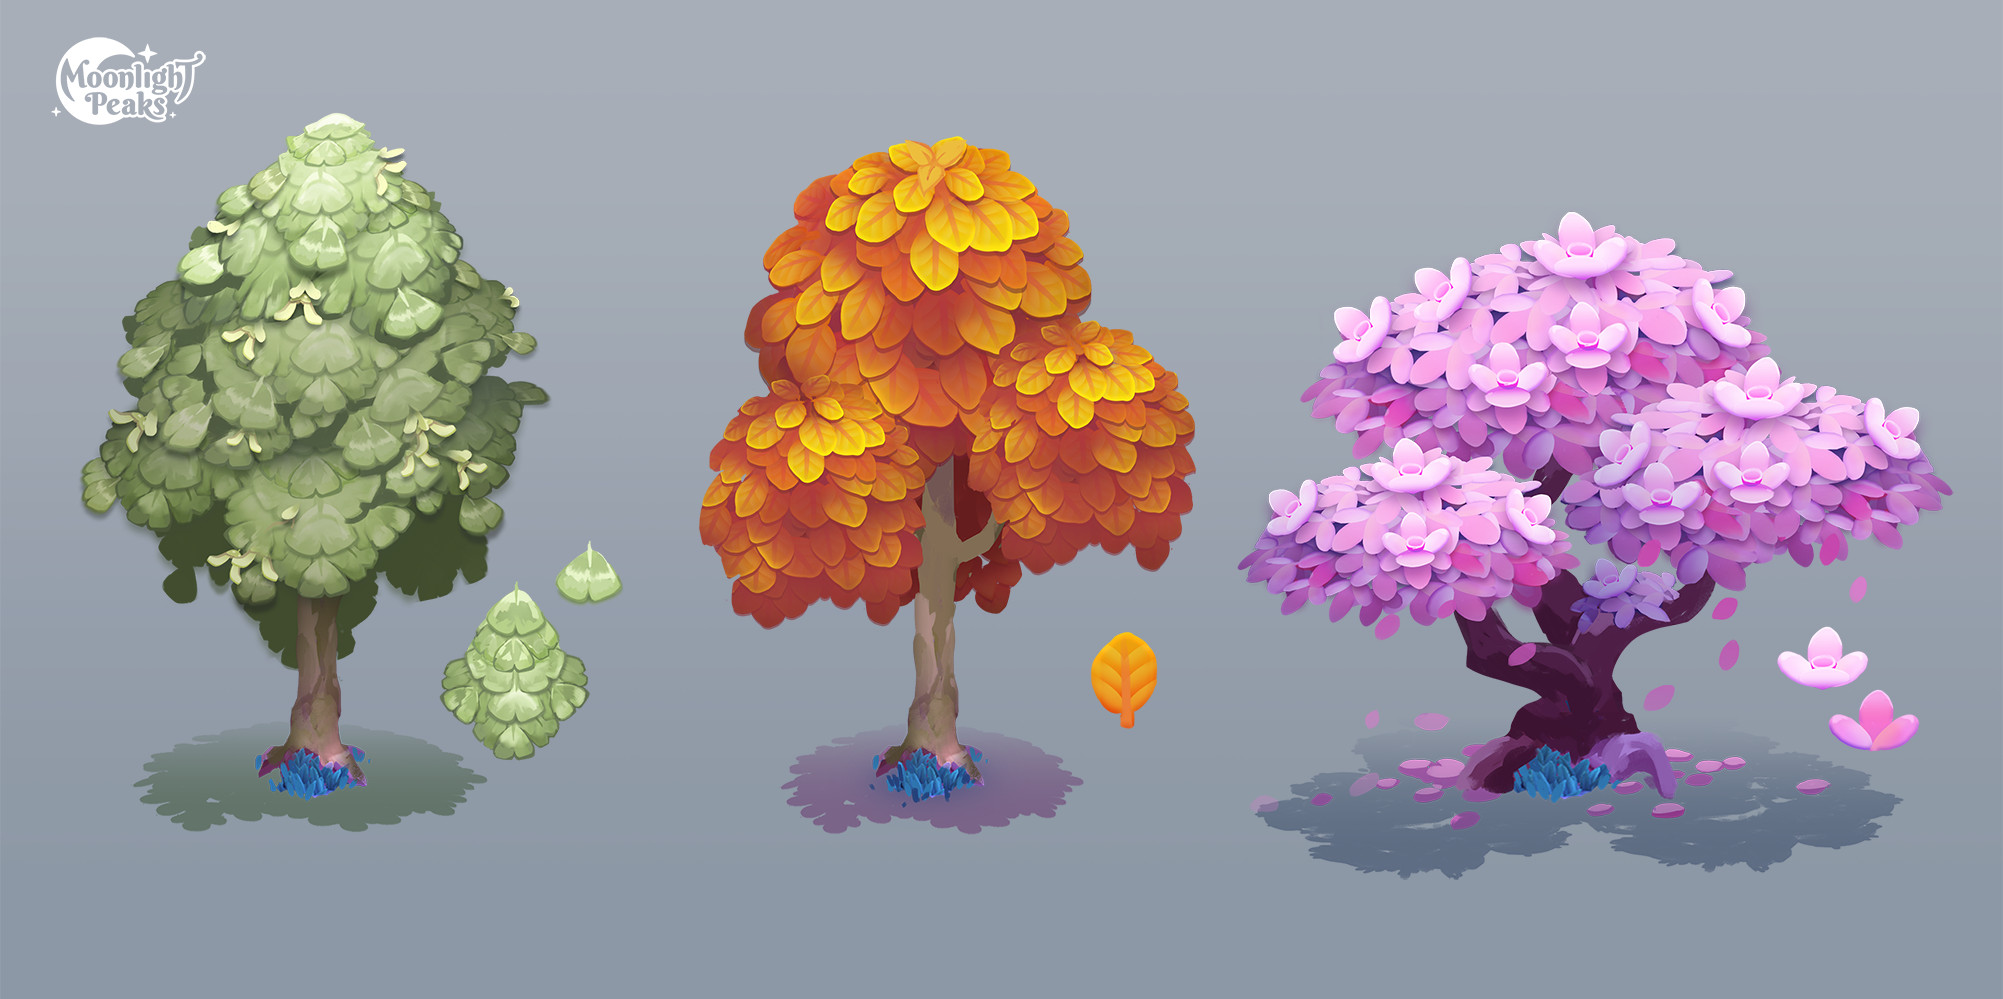 More Trees